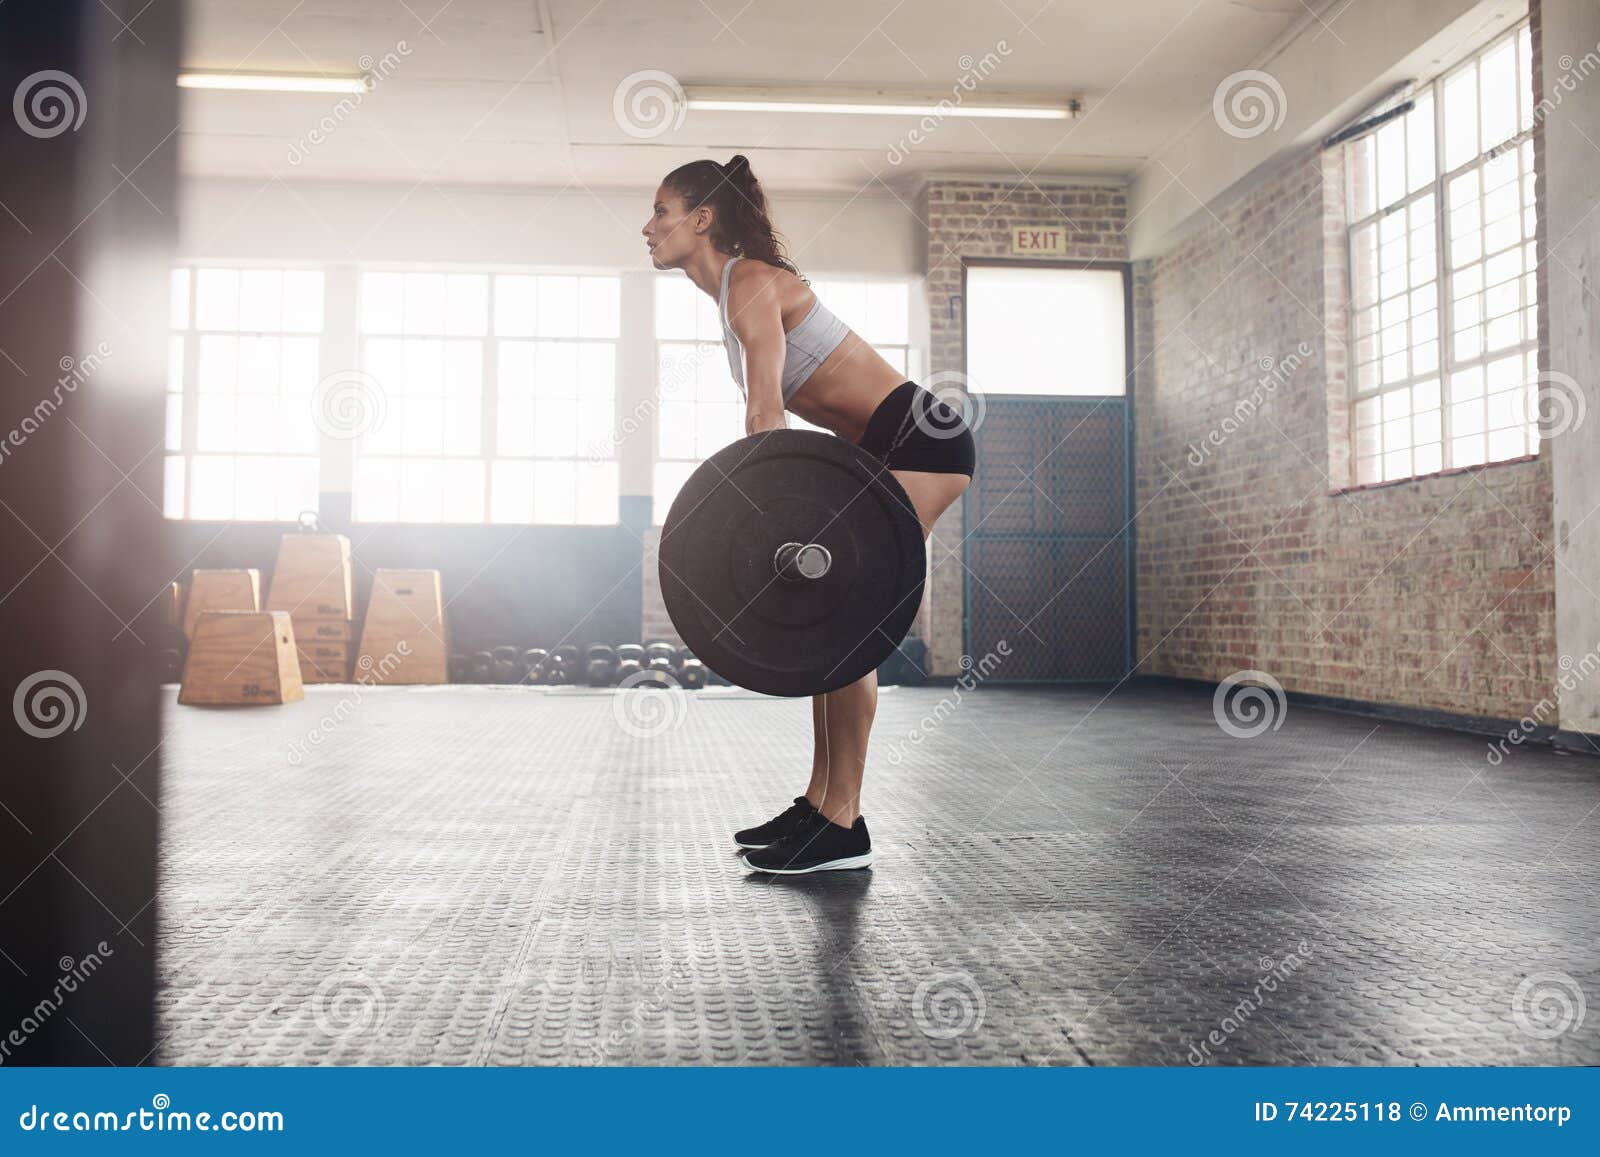 Fitness Woman Doing Weight Lifting at Health Club. Stock Photo - Image ...